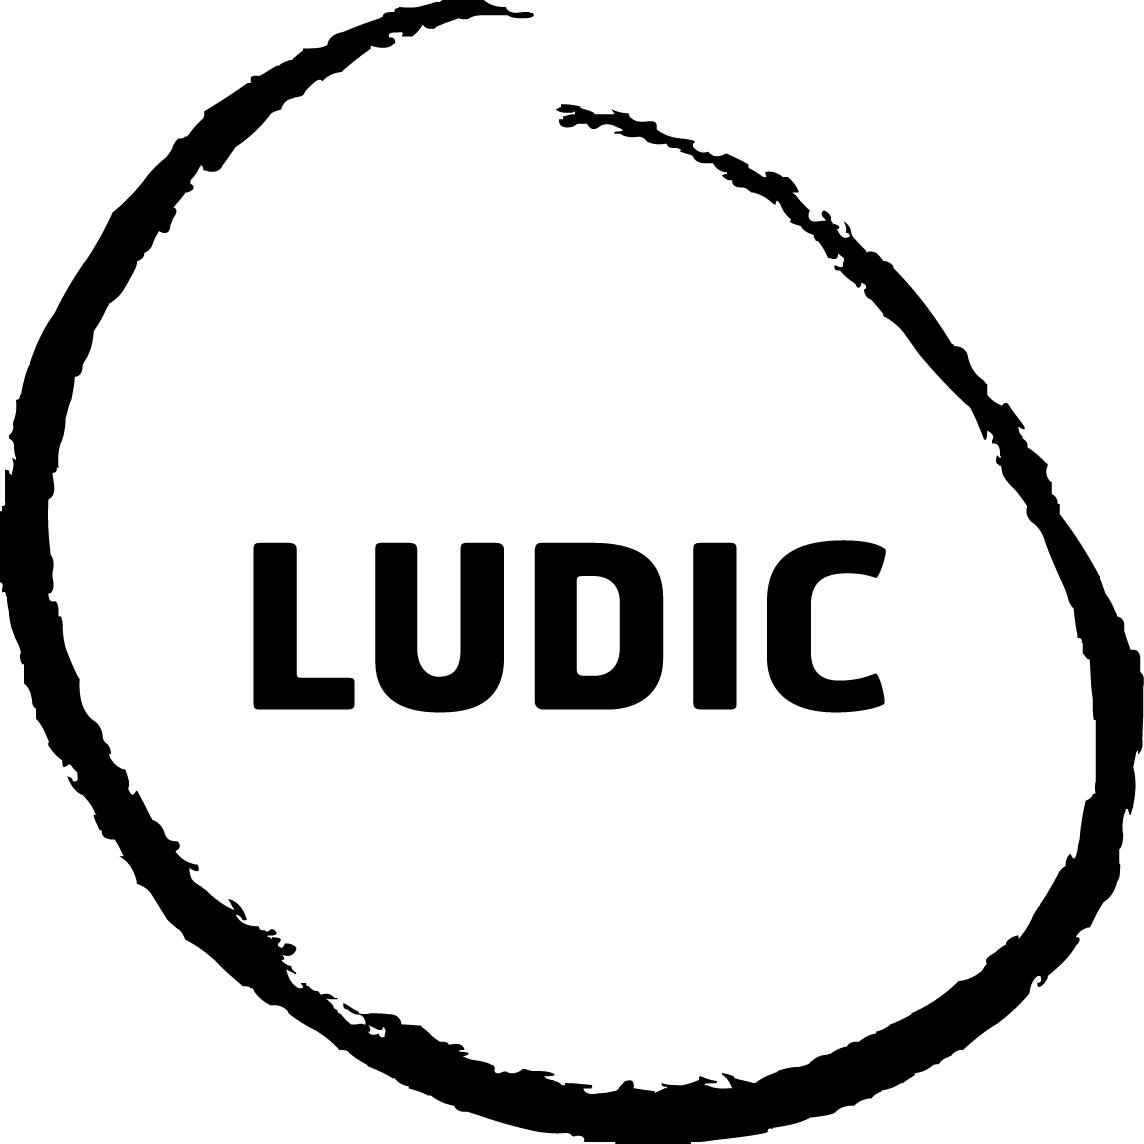 LUDIC_LOGO_BLACK_new Services: Shared Service Centre Optimisation - Ludic Consulting